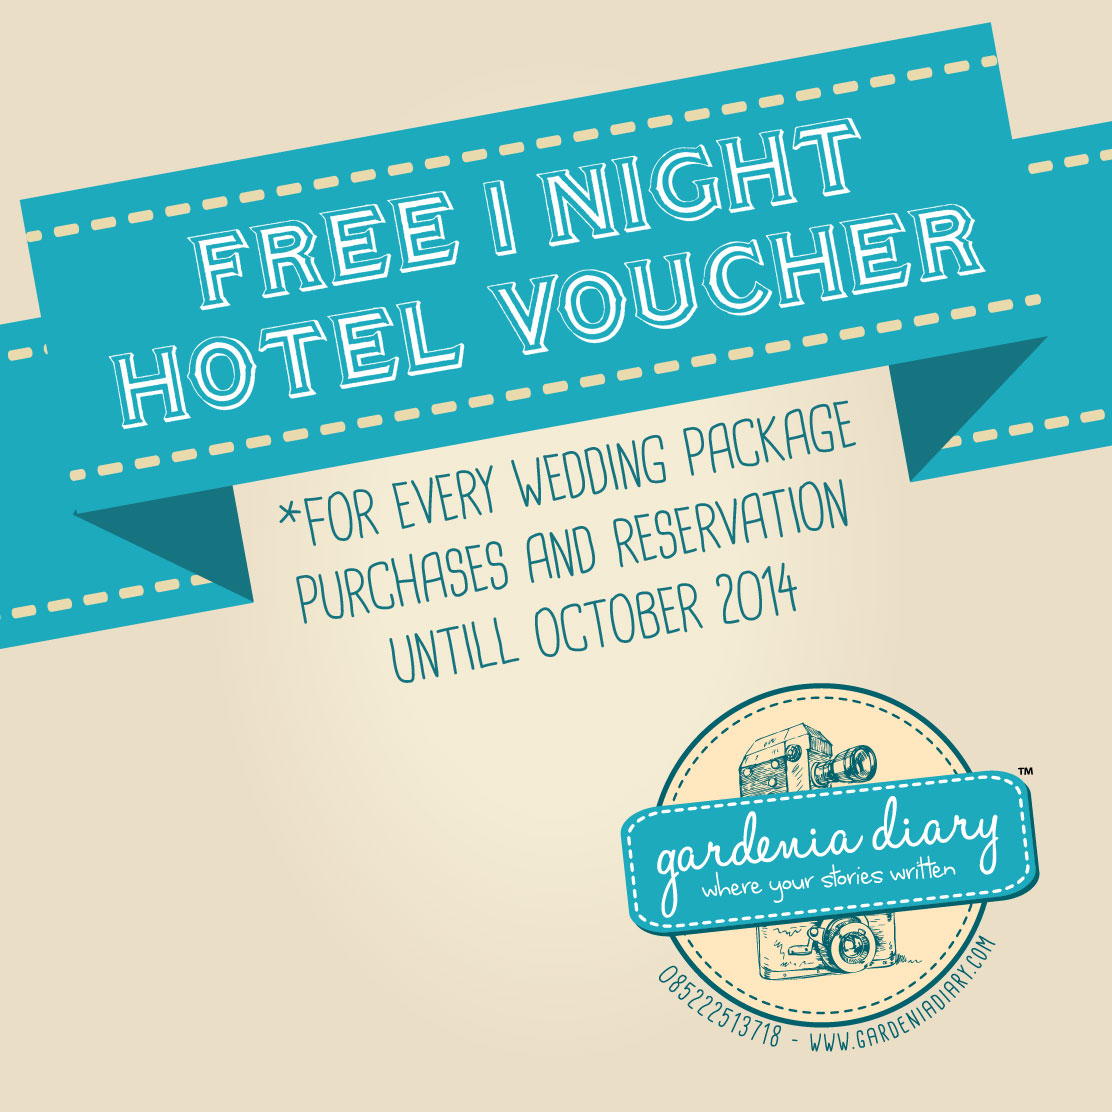 How do you get a hotel voucher for a free night?